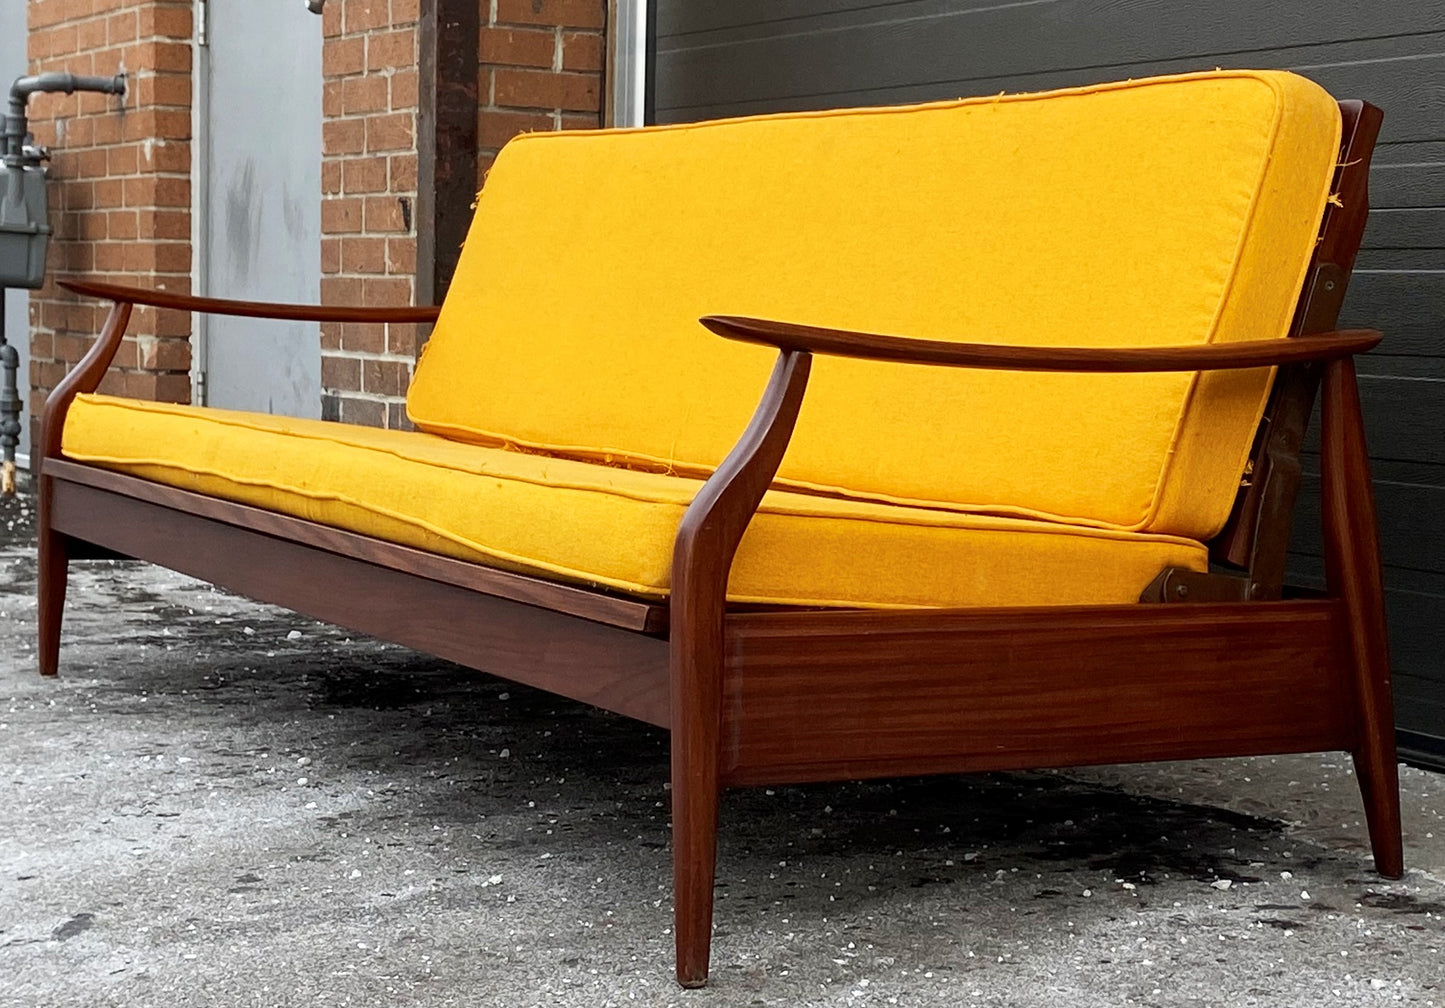 REFINISHED Mid Century Modern Solid Teak Sofa - Bed with NEW CUSHIONS